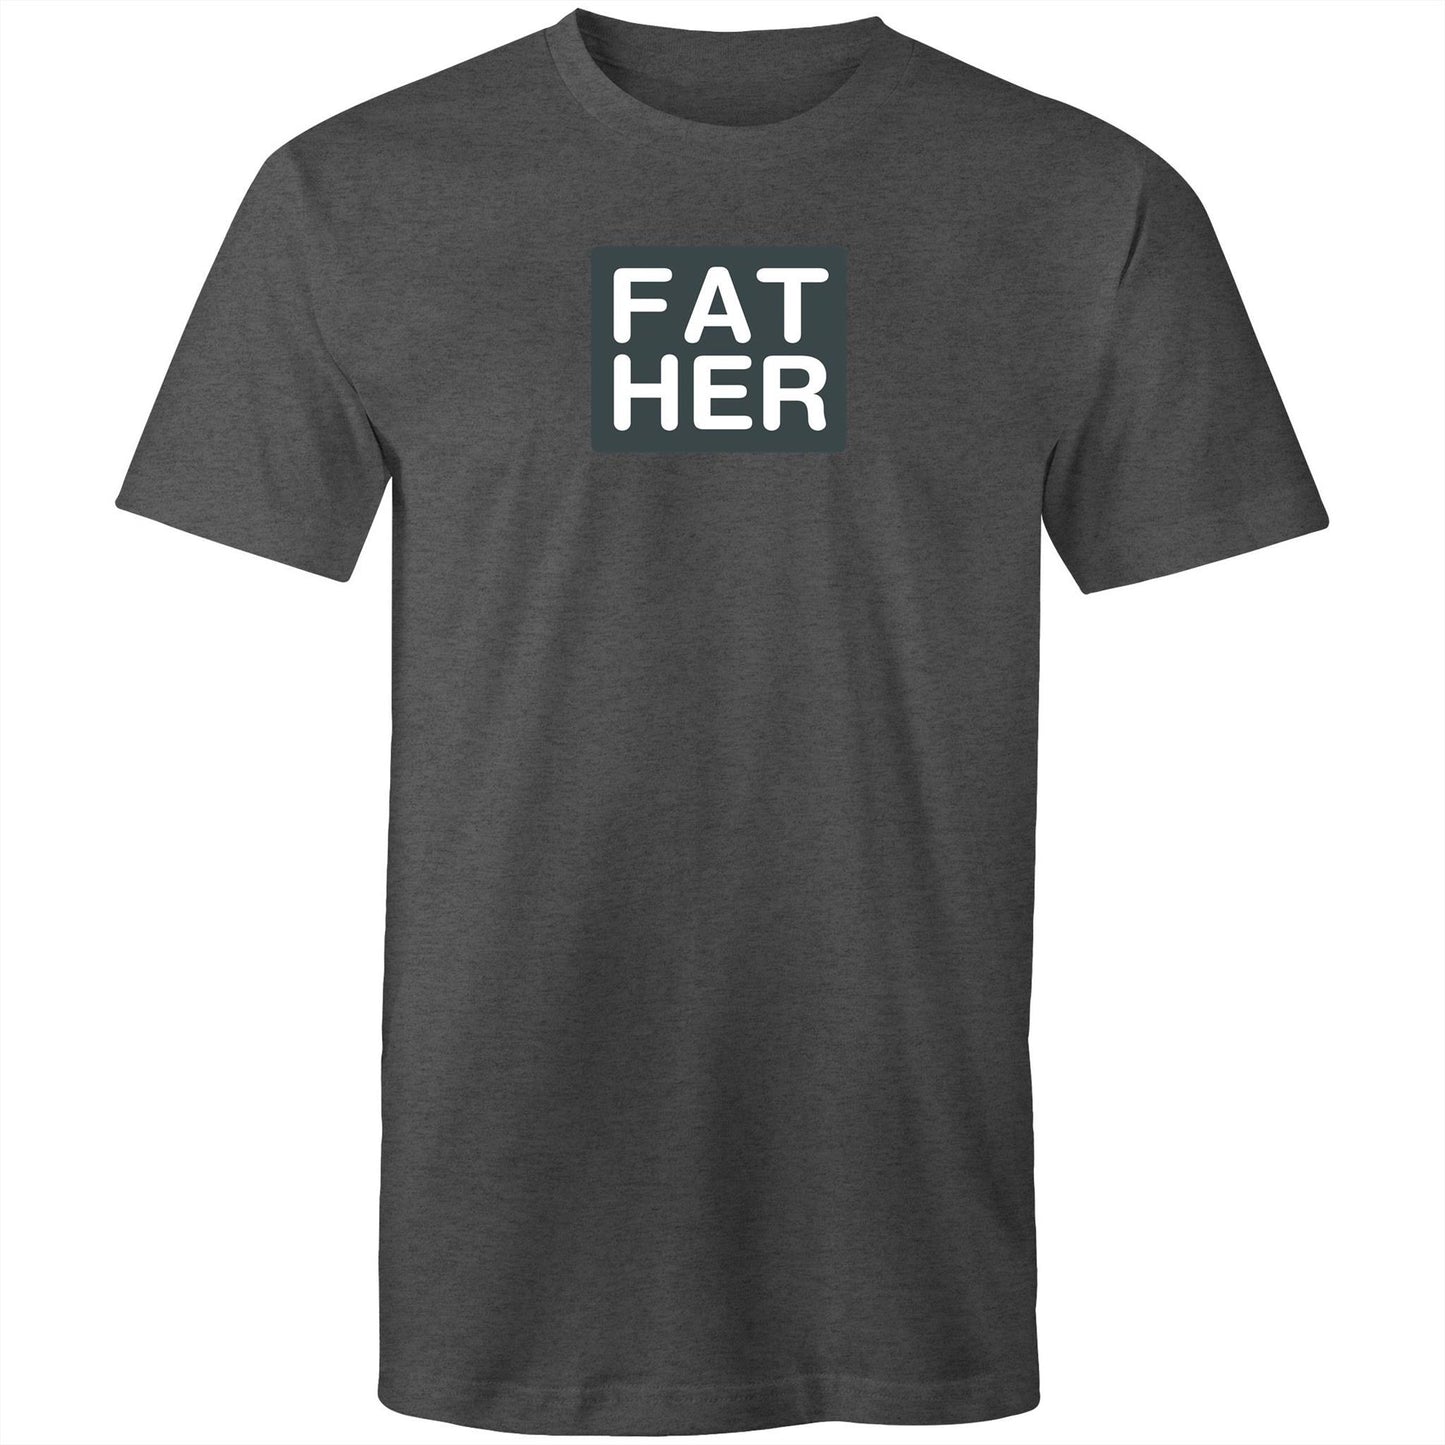 FAT HER T Shirts for Men (Unisex)